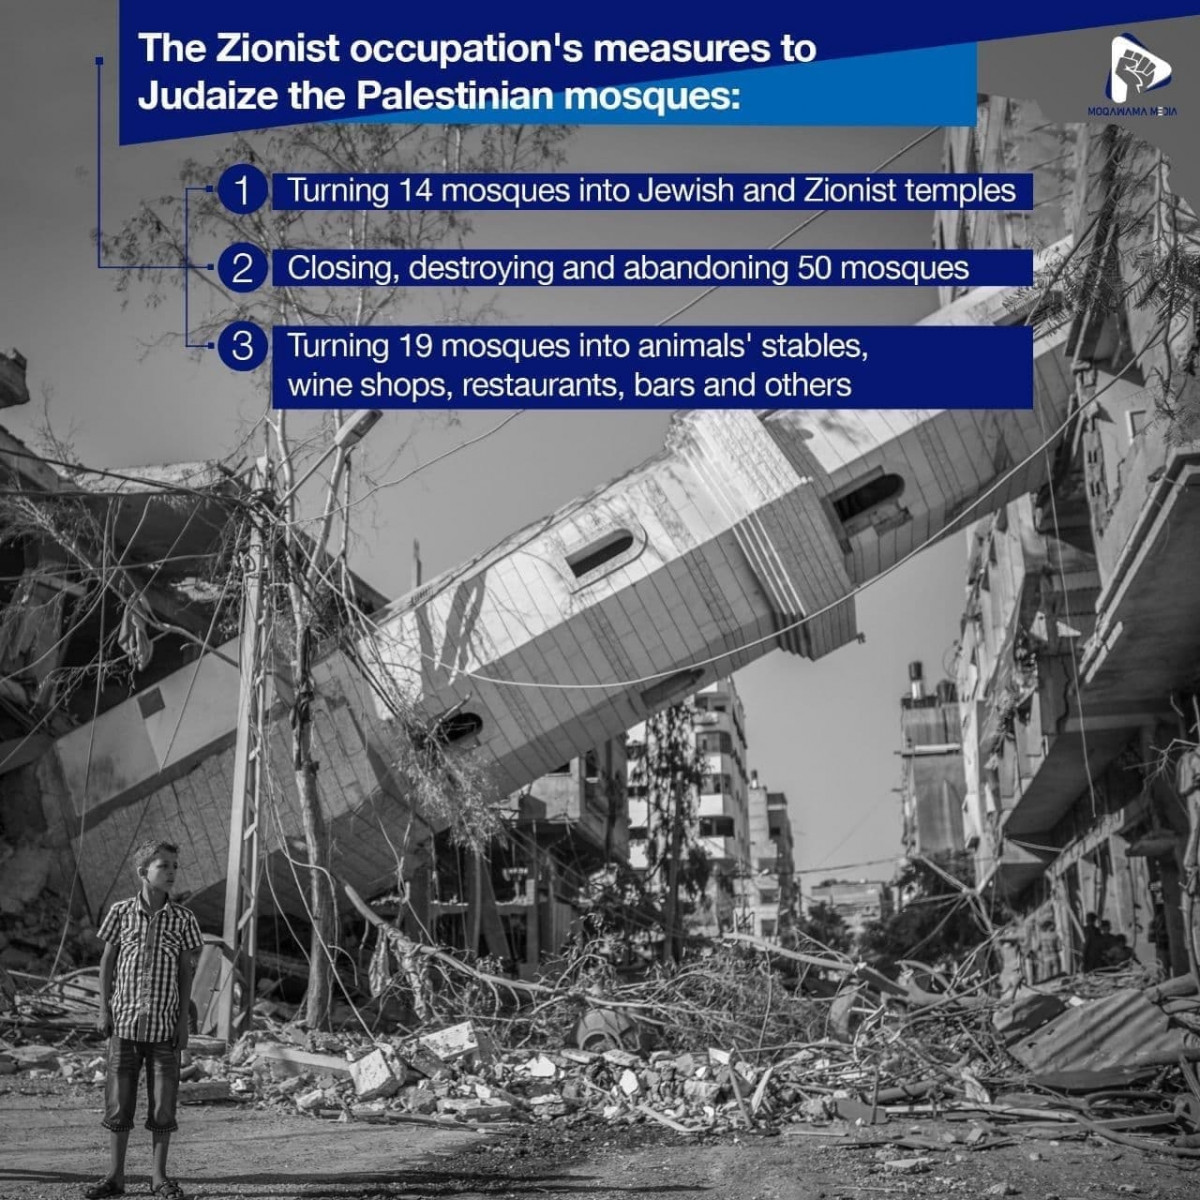 The Zionist occupation's measures to Judaize the Palestinian mosques: